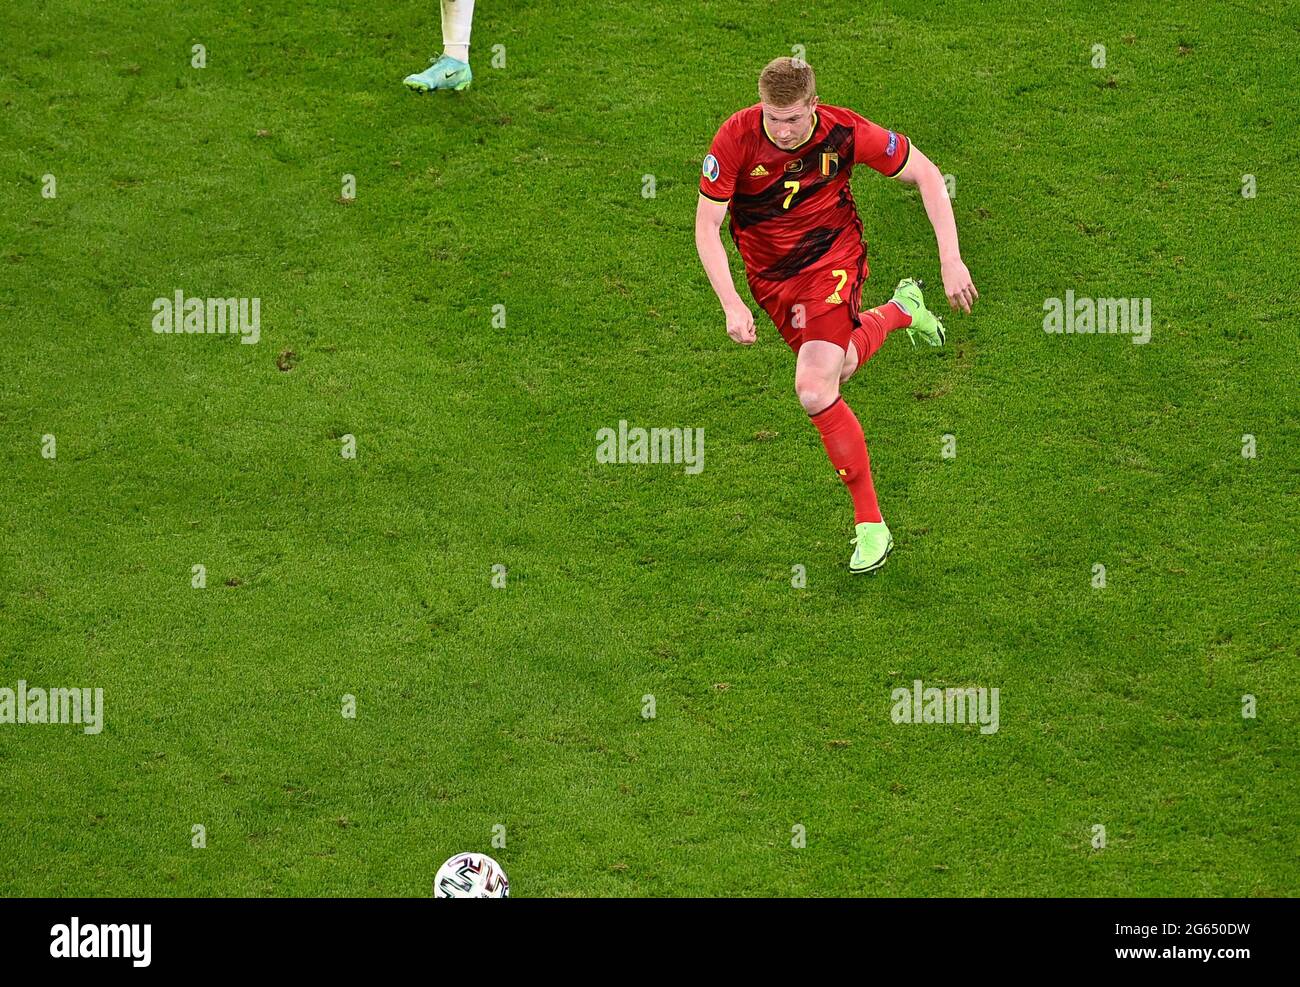 Munchen, Germany. 02nd July, 2021. Belgian midfielder Kevin De Bruyne (7) pictured during a soccer game during the quarter final Euro 2020 European Championship between the Belgian national soccer team Red Devils and Italy, called the Azzurri, on friday 2 nd of July 2021 in the Allianz Arena in Munchen, Germany . PHOTO SPORTPIX | SPP | DAVID CATRY Credit: SPP Sport Press Photo. /Alamy Live News Stock Photo